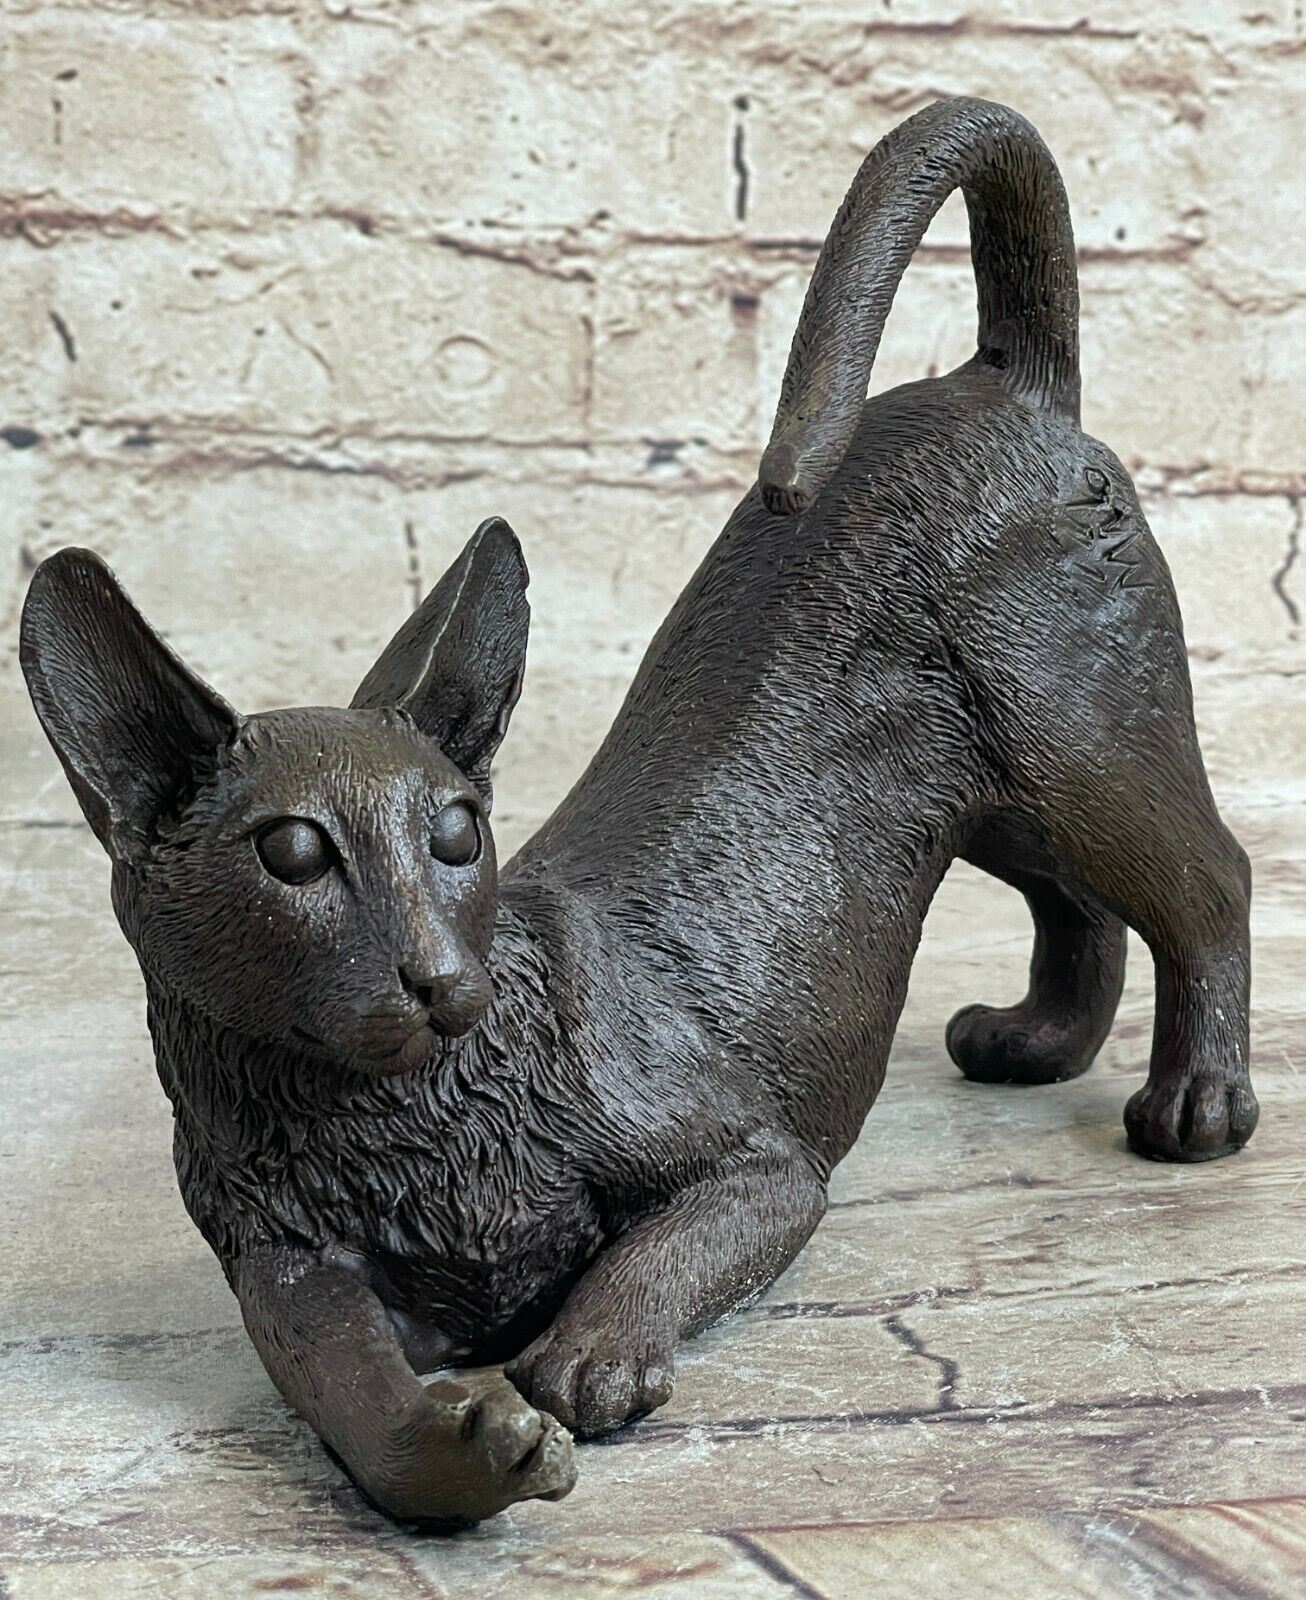 Real 100% Bronze Miniature Cat Figure Home Office Decoration Statue Gift Animal